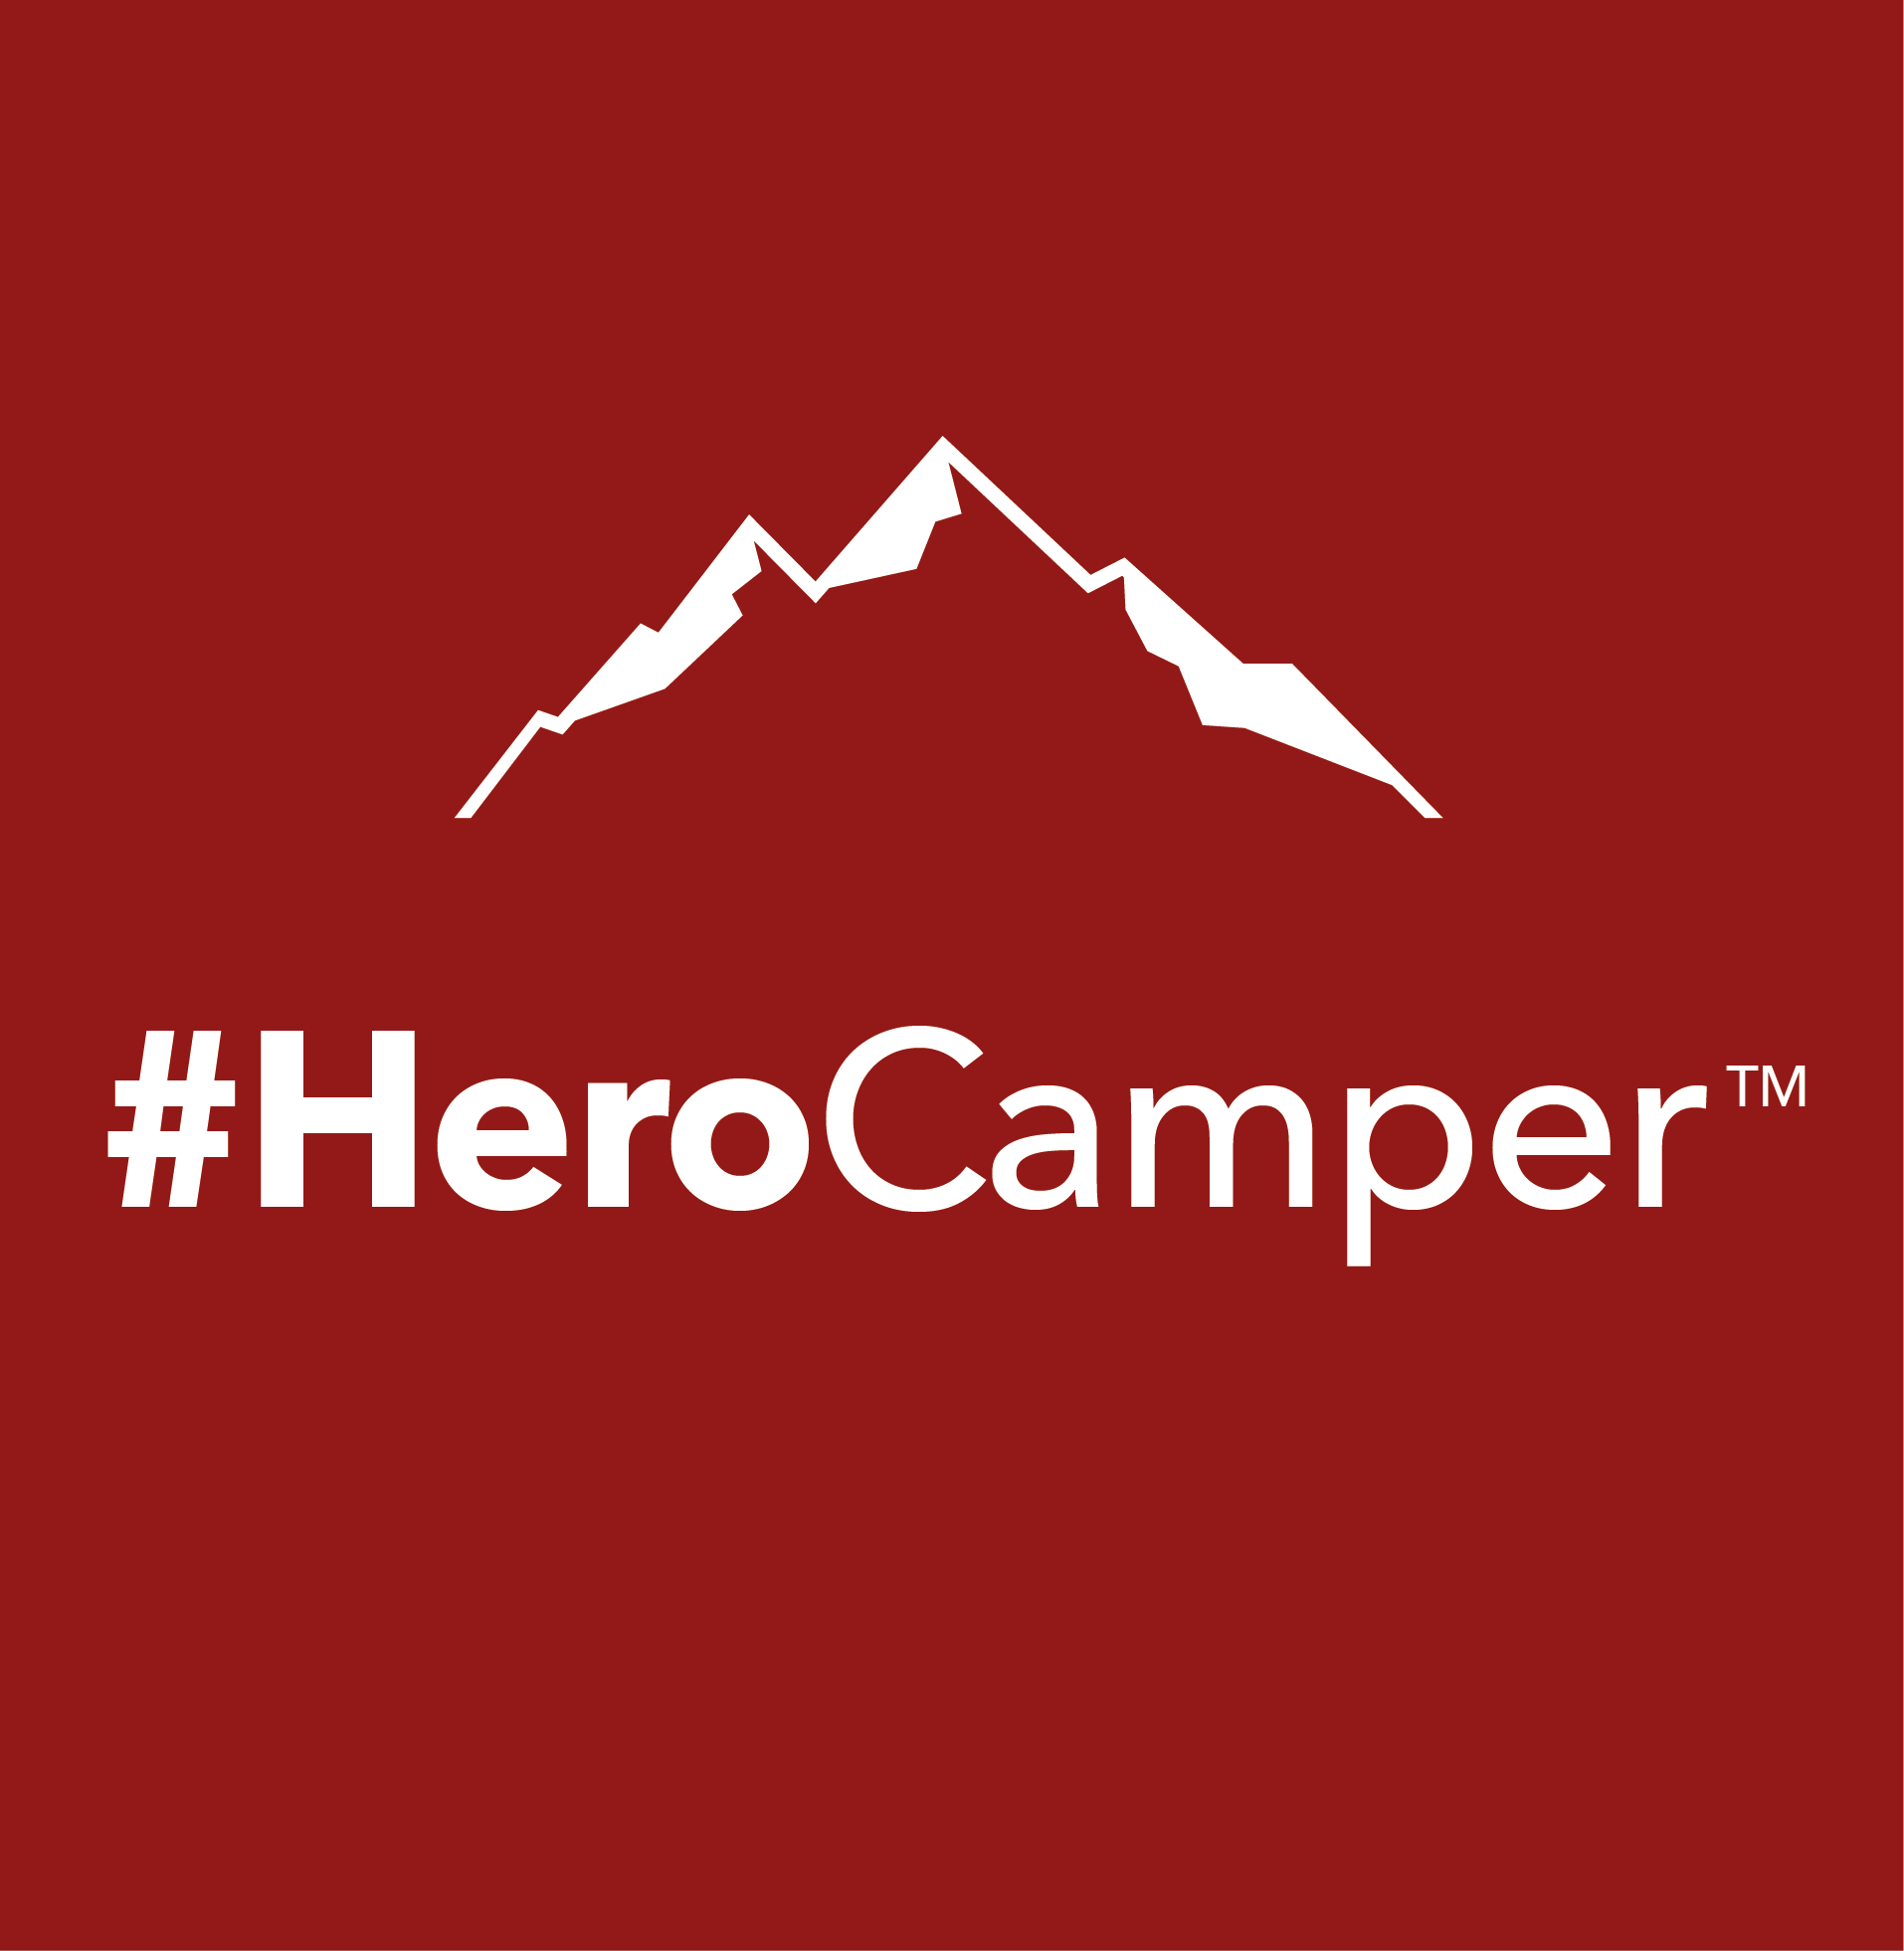 Home - Get Out And Stay - #HeroCamper